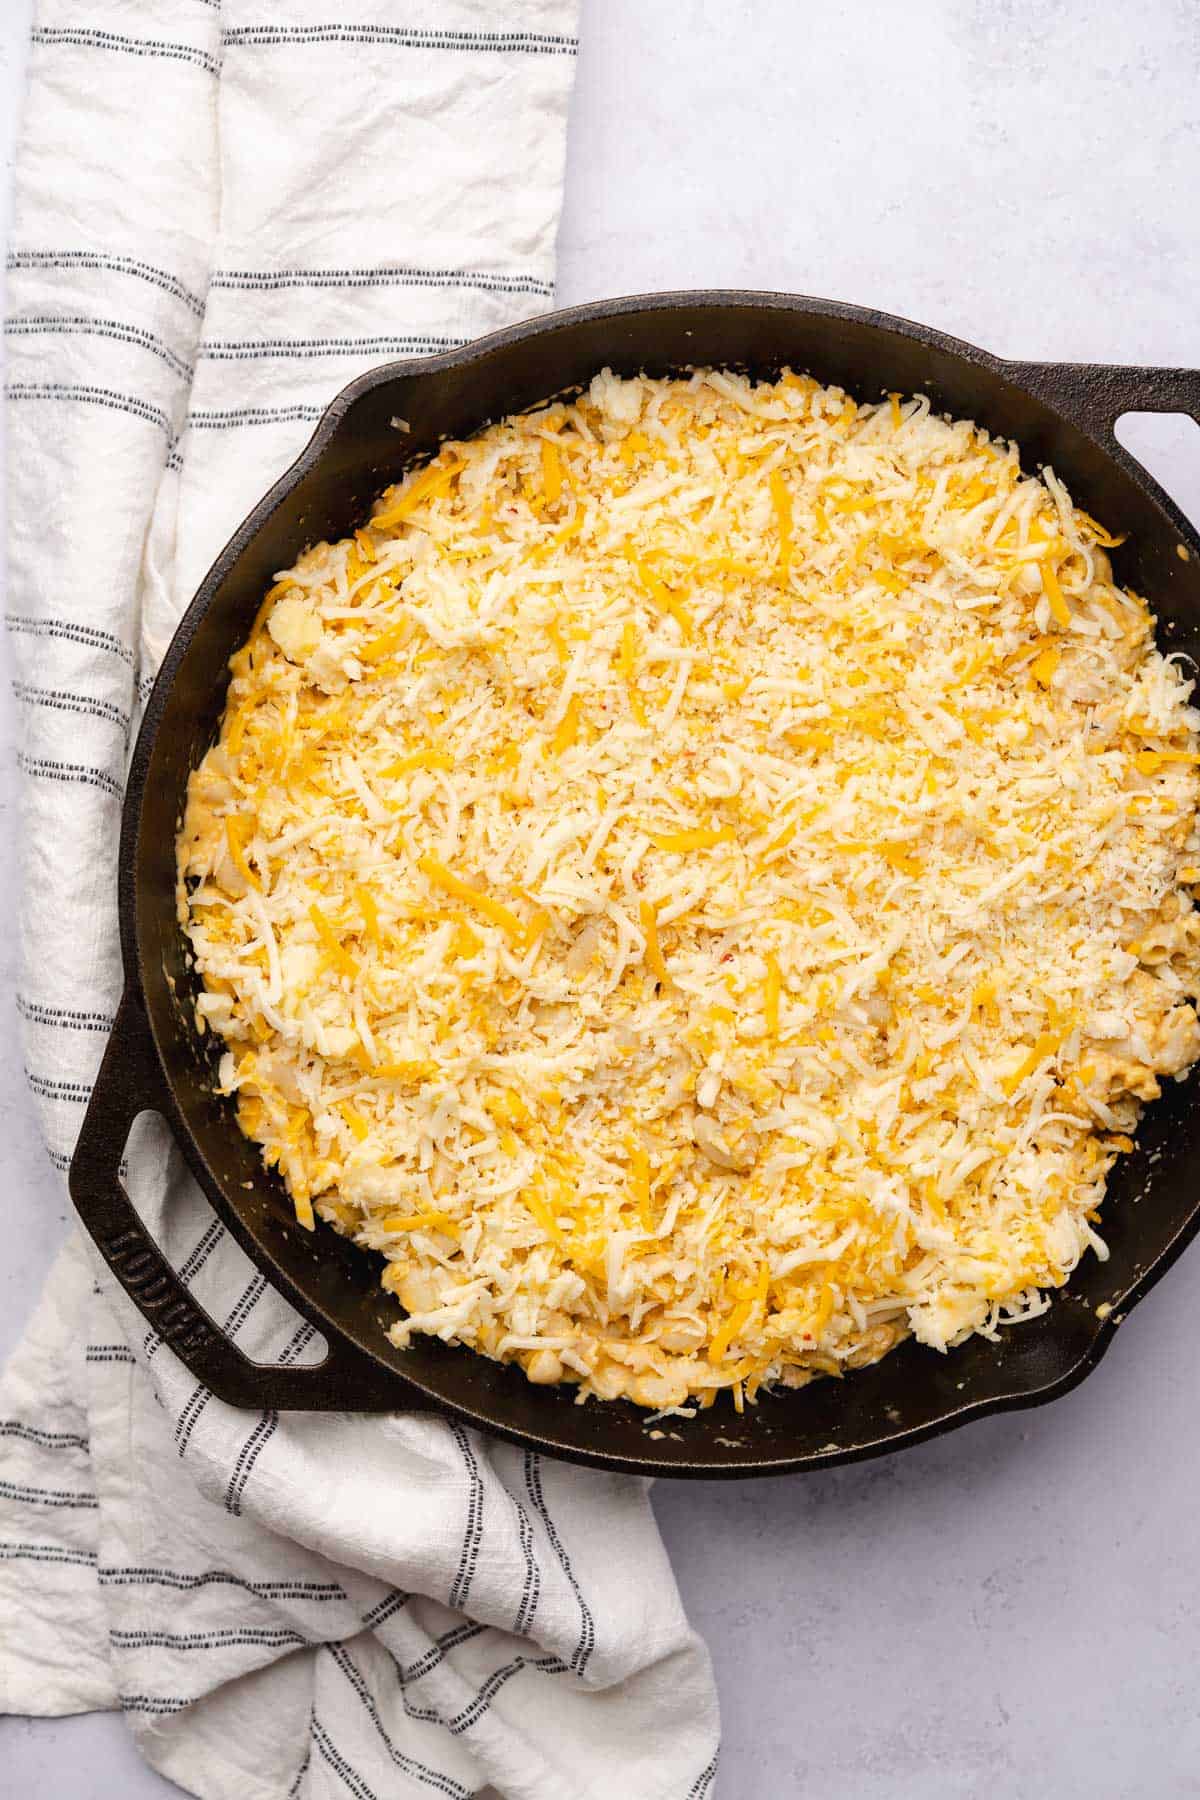 macaroni with cheese on top in a cast iron skillet getting ready to bake